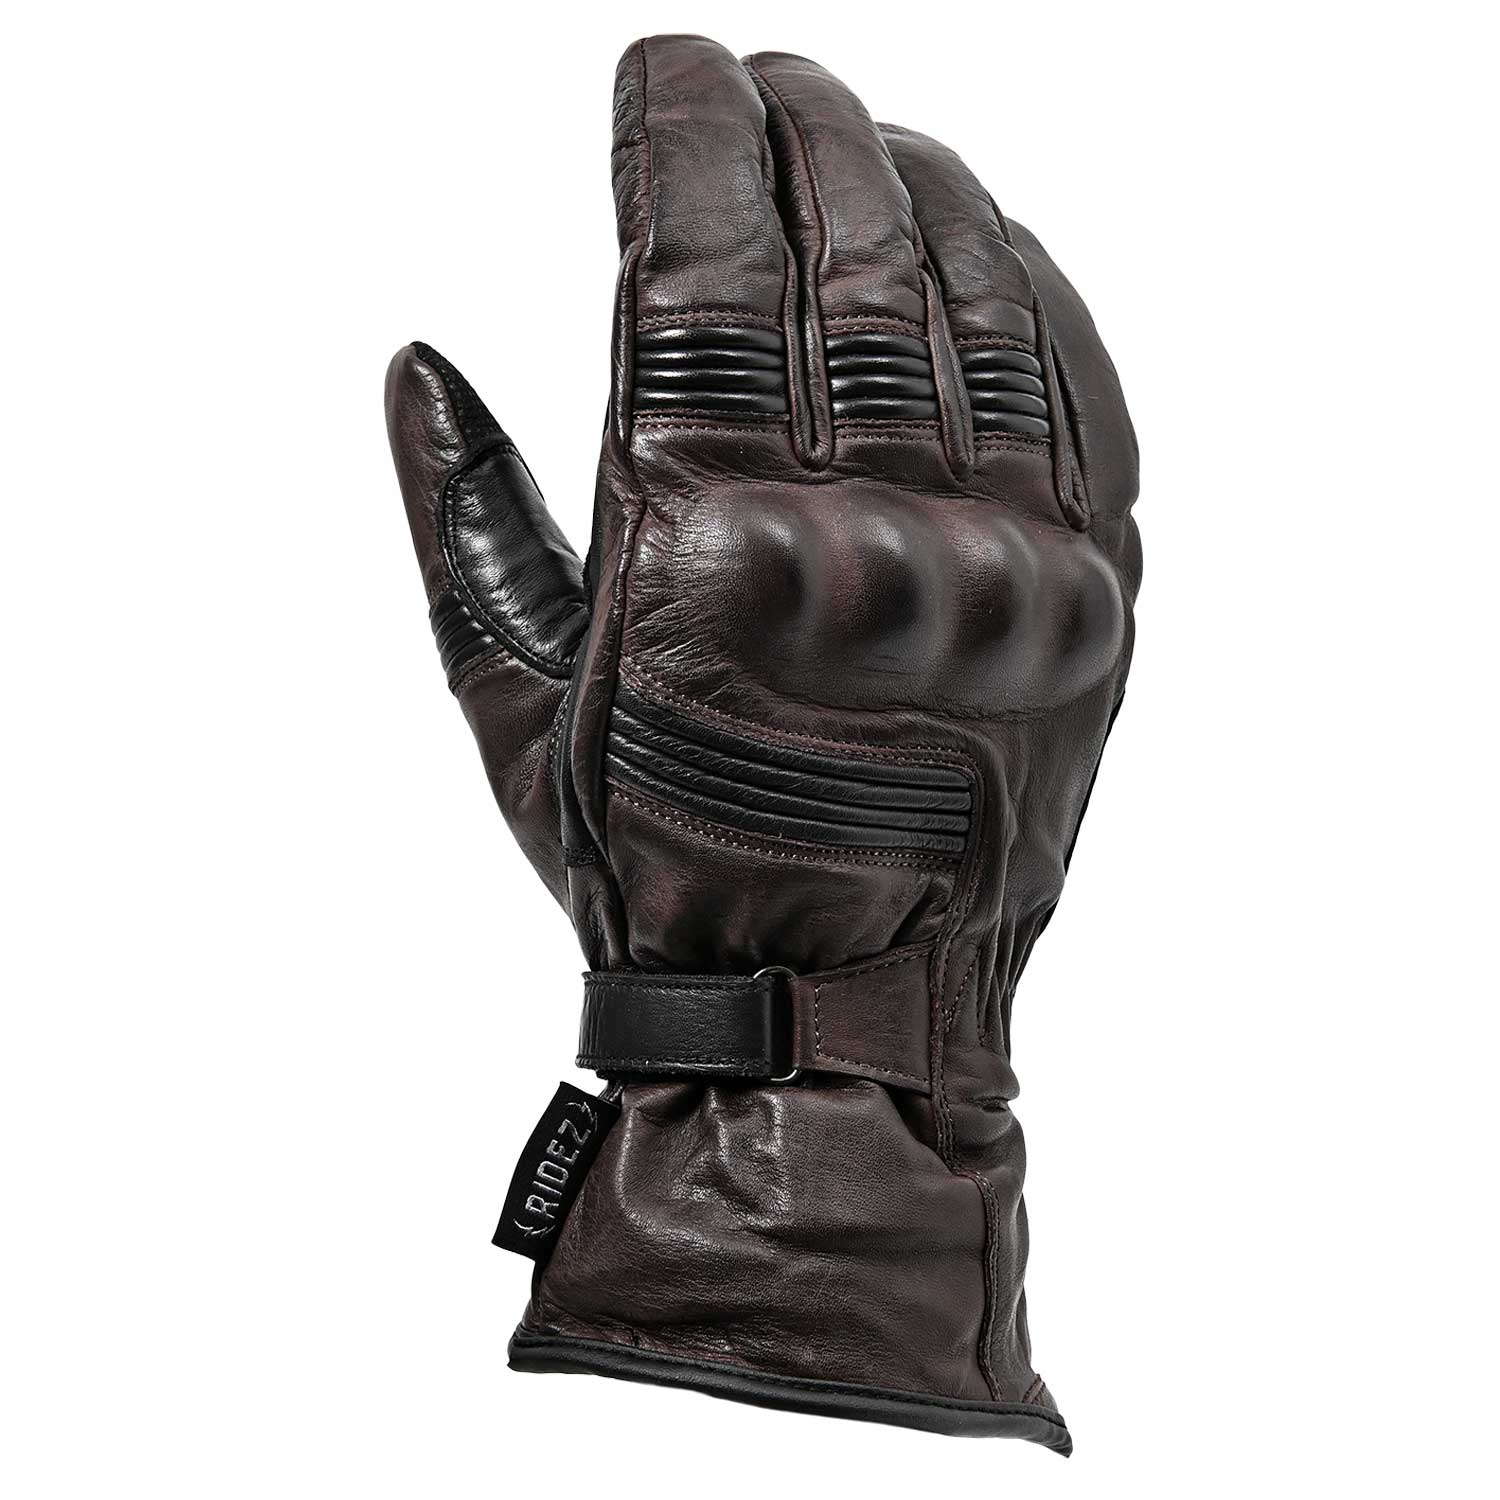 RIDEZ HECTOR GLOVES Motorcycle Leather Gloves DARK BROWN RWG09